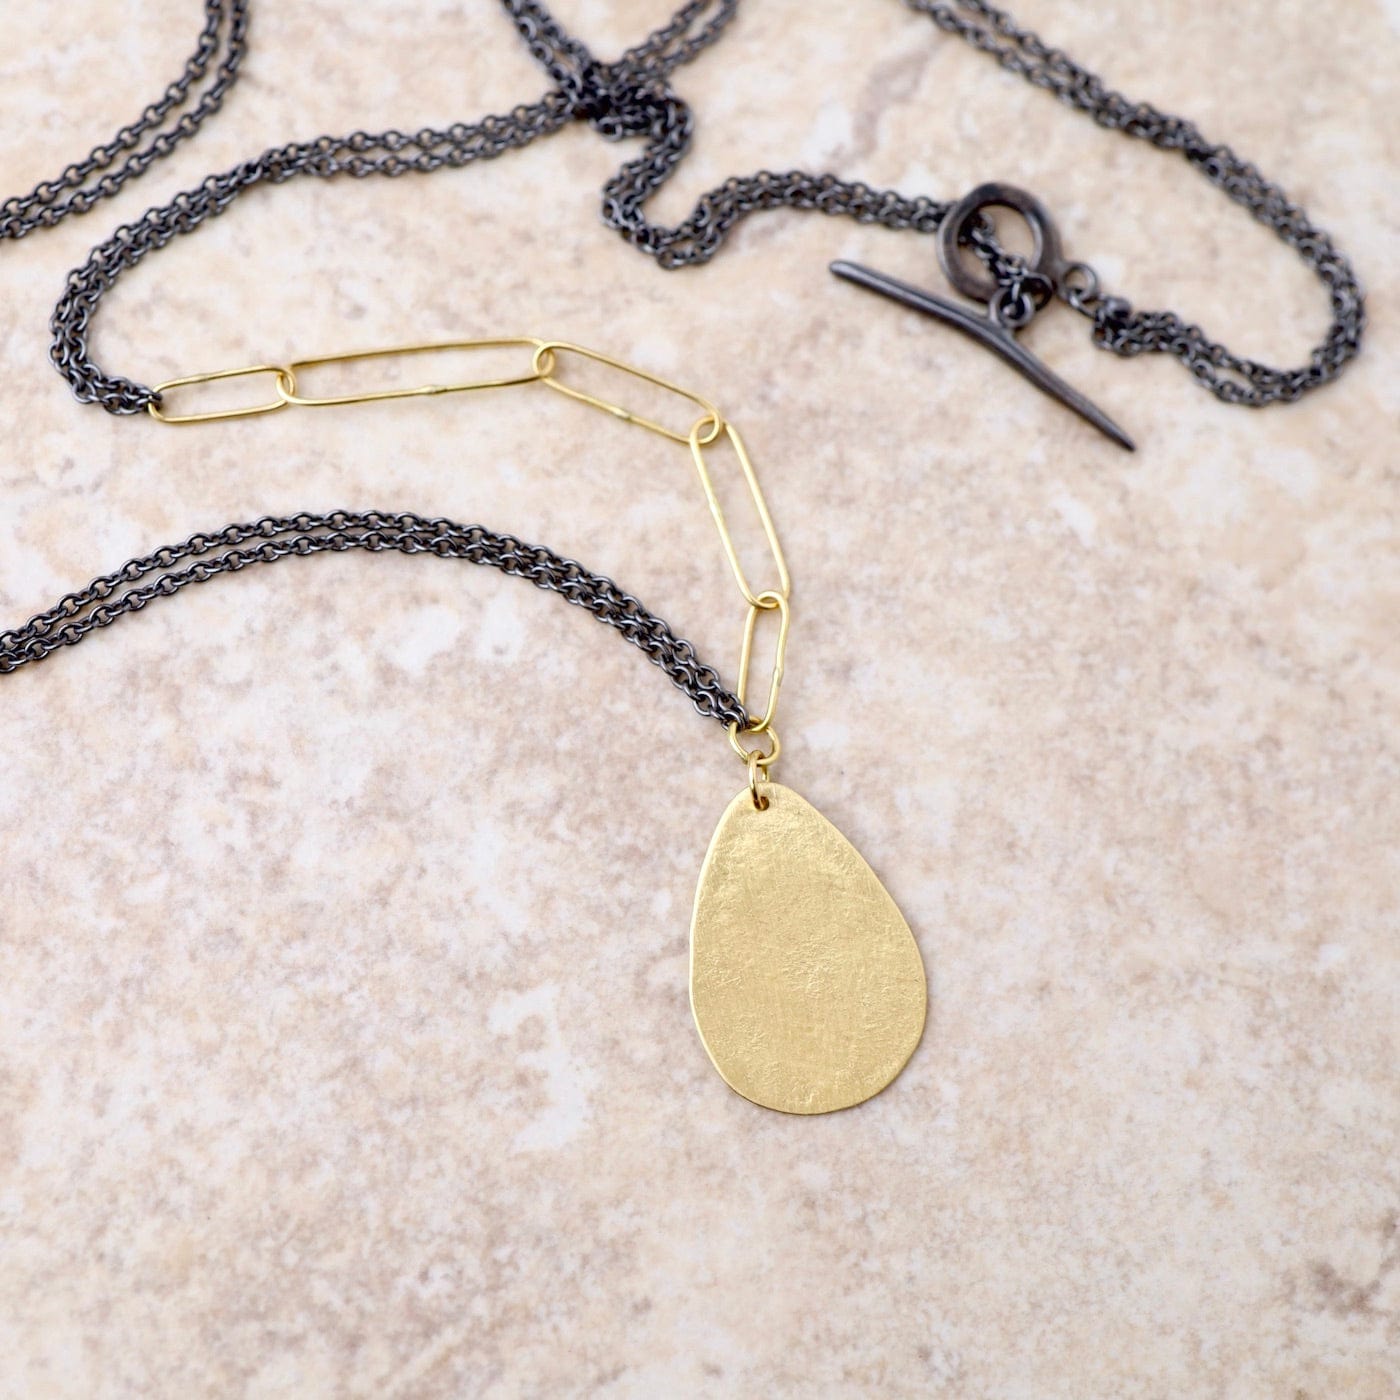 NKL-18K Small 18k Parchment Teardrop with Paperclip Links Necklace